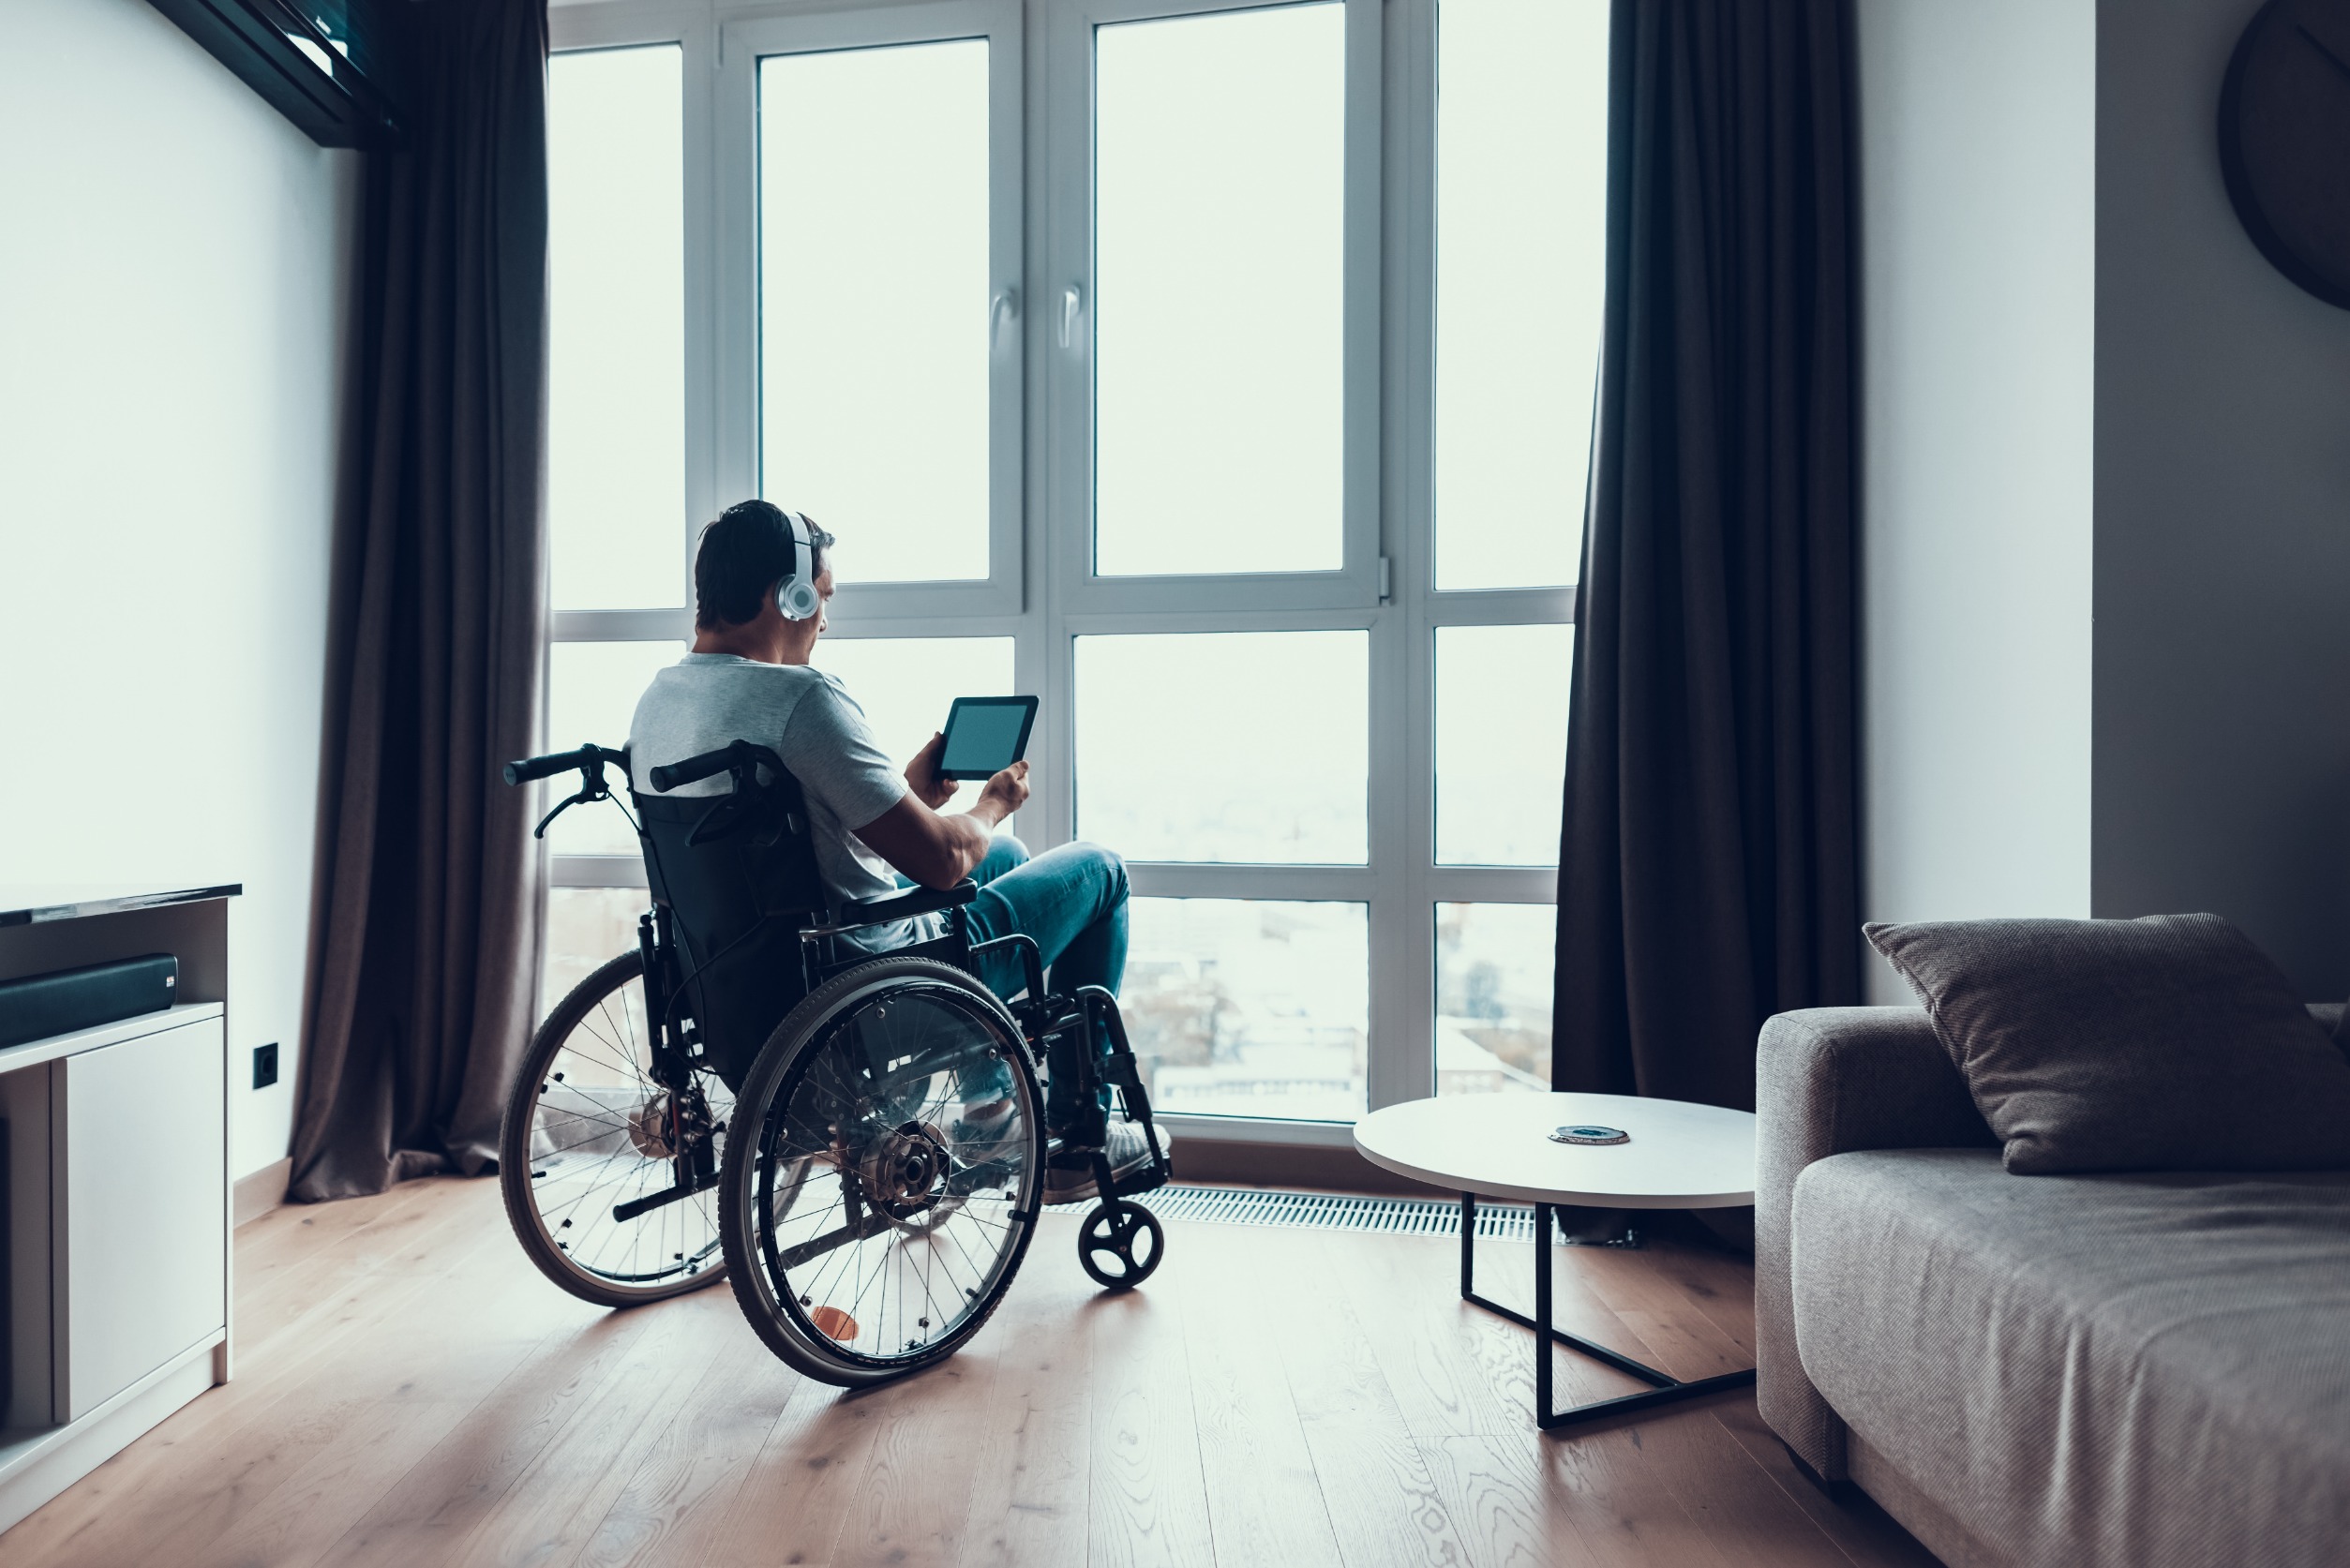 Making Your Hotel ADA Accessible & Other Ways to Be More Inclusive